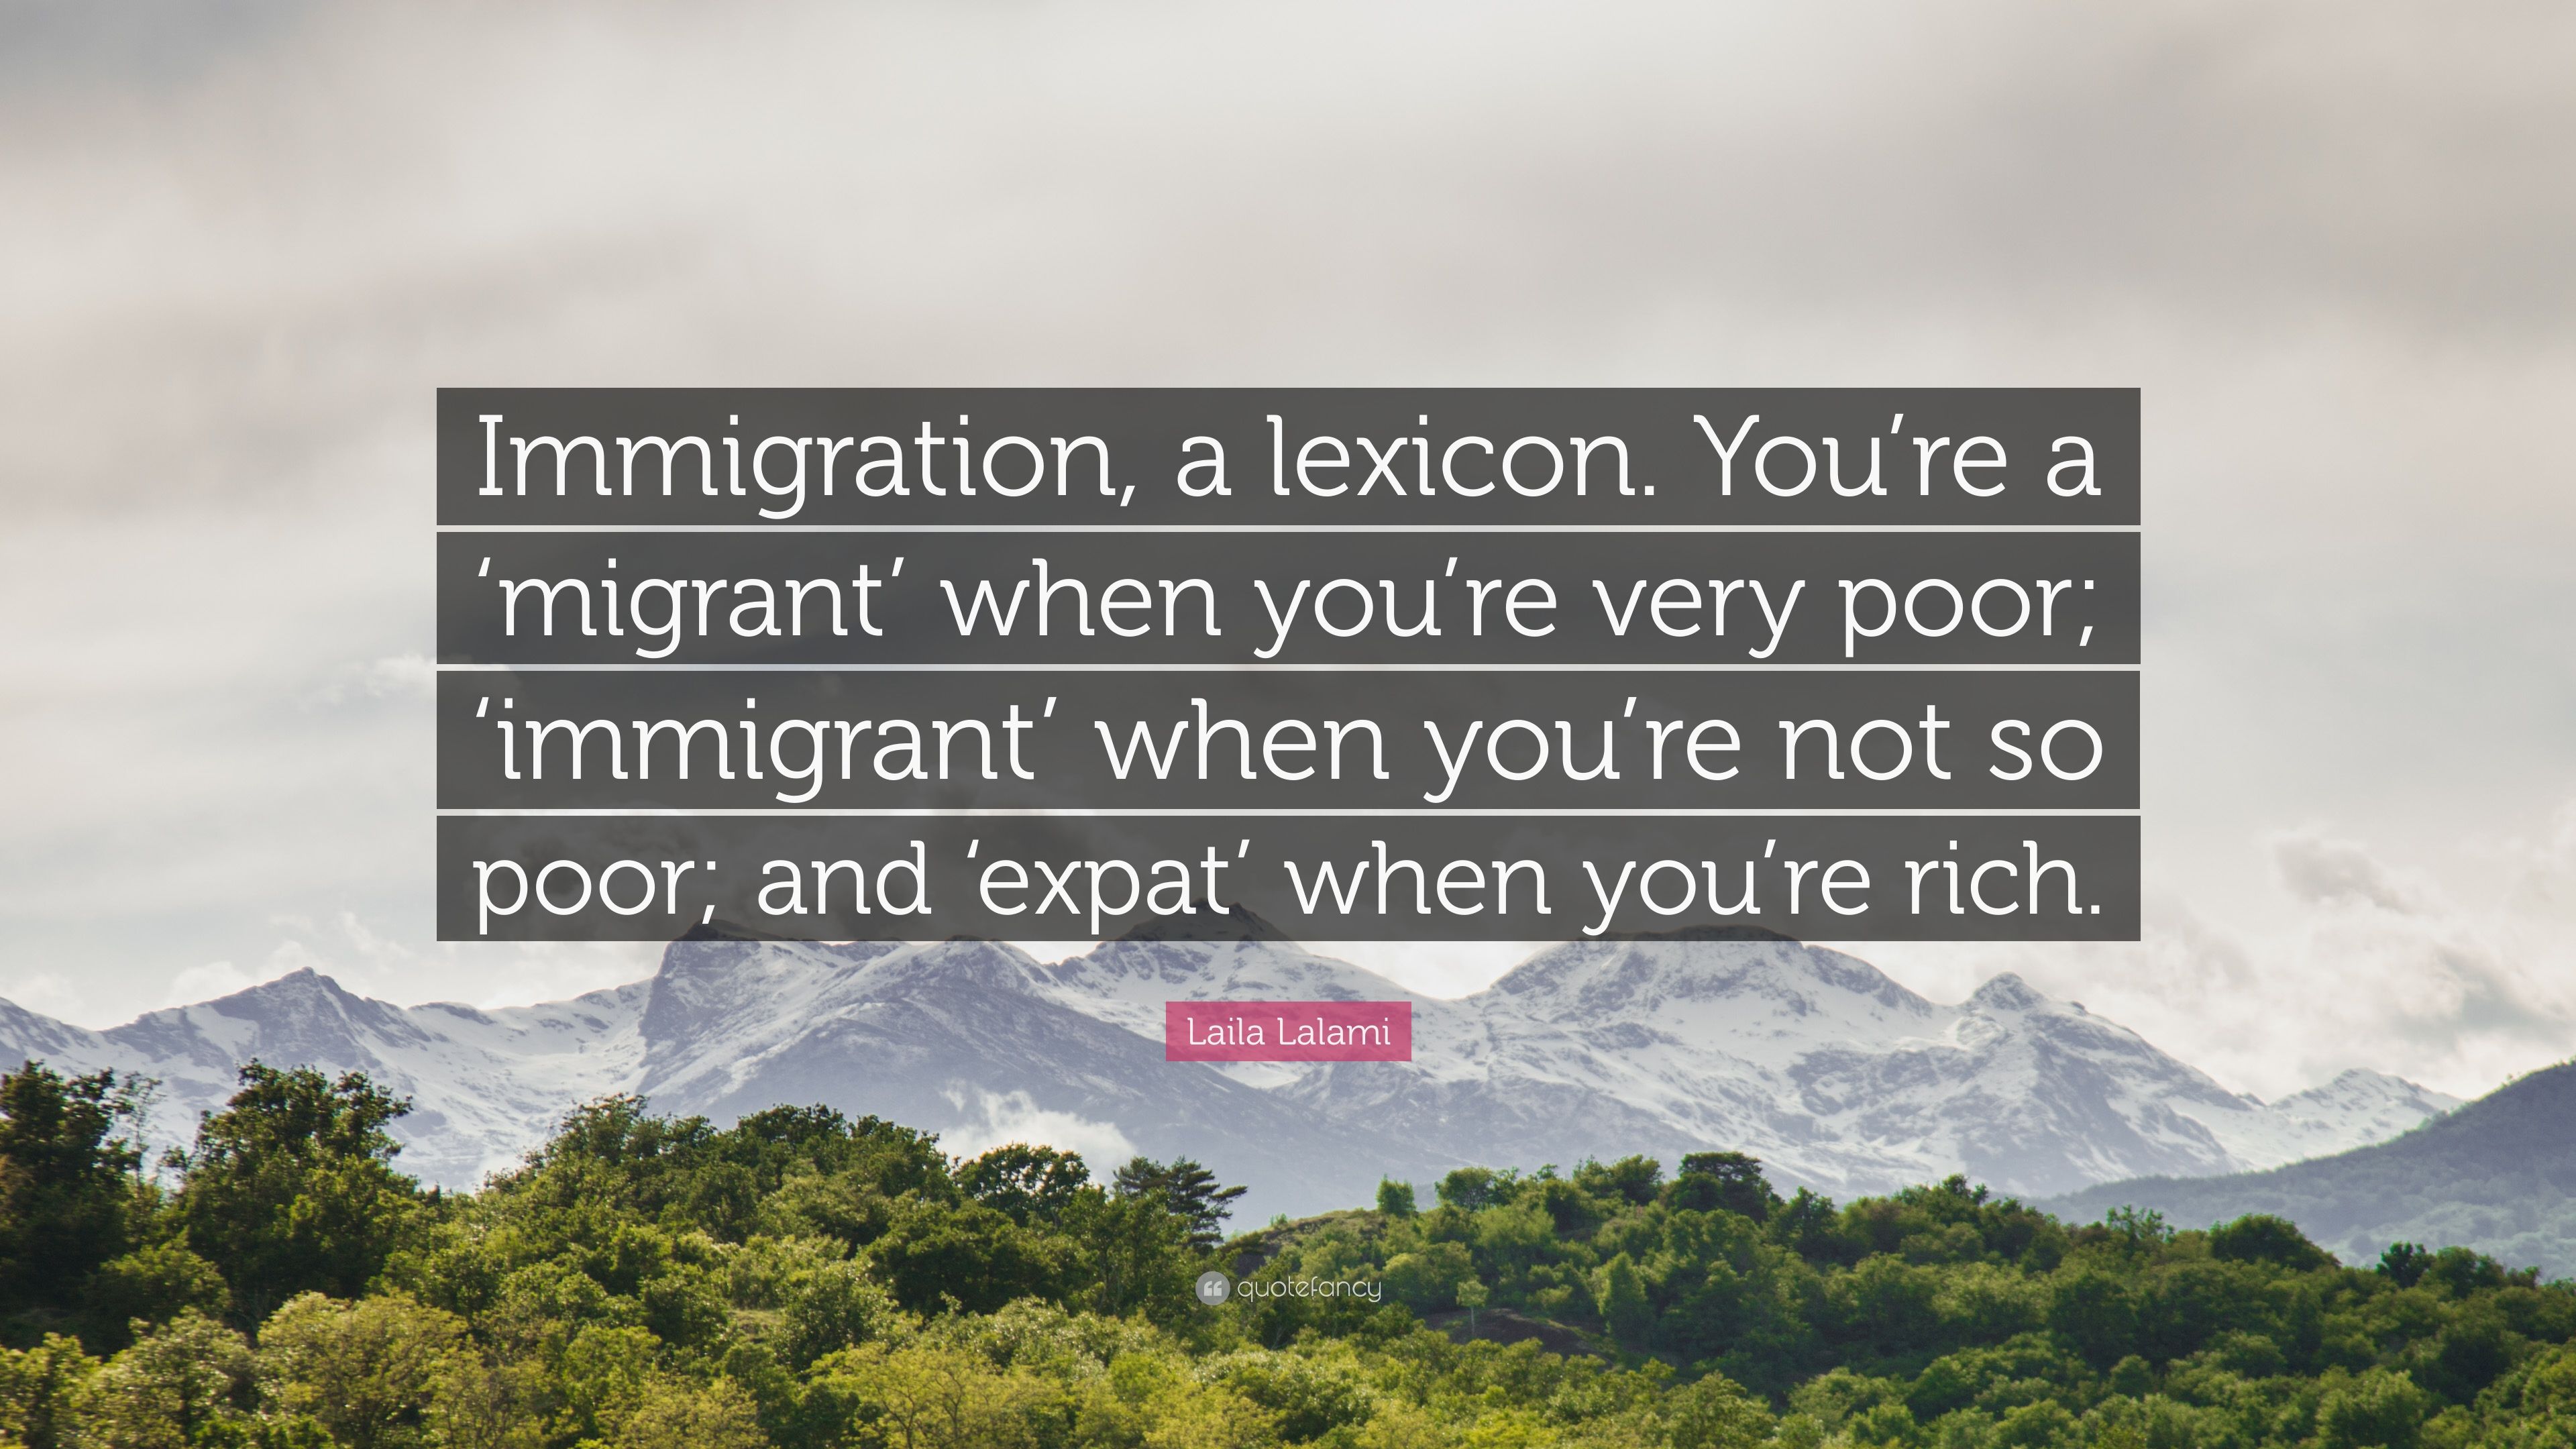 Laila Lalami Quote: “Immigration, a lexicon. You're a 'migrant' when you're very poor; 'immigrant' when you're not so poor; and 'expat' when .” (7 wallpaper)